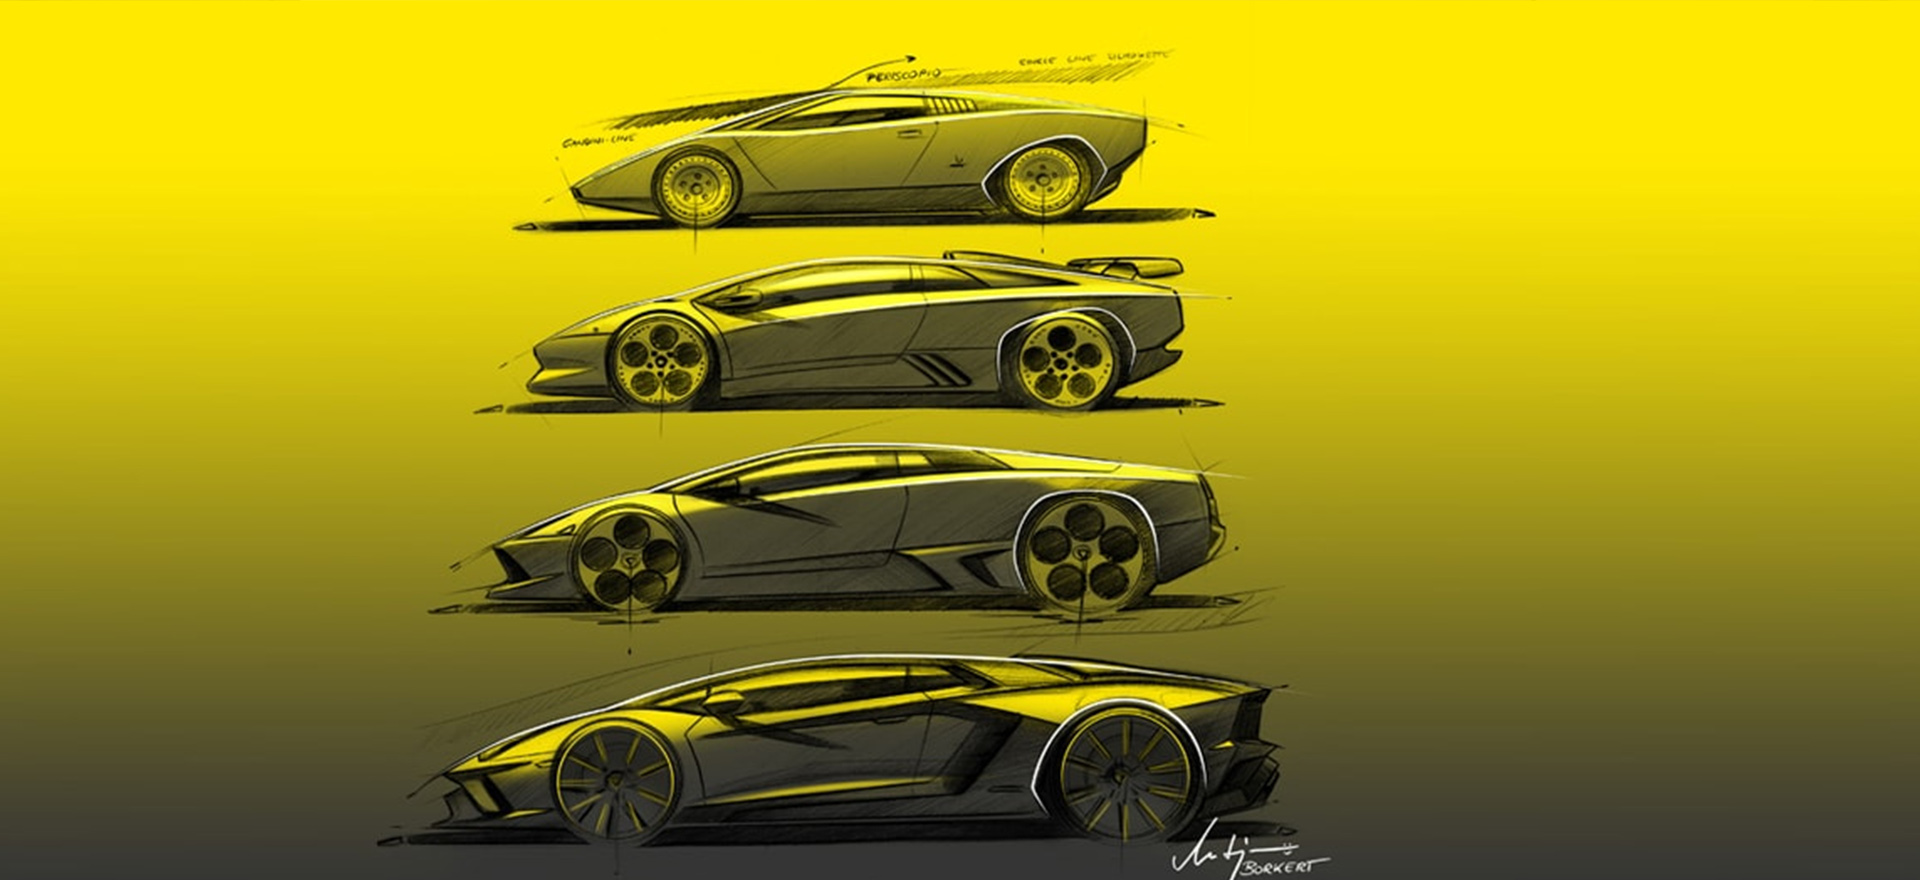 From #Lamborghini: The secret behind the incredible design of Lamborghini?  The sketches made by our Centro Stile … | Lamborghini, The incredibles,  Automotive design